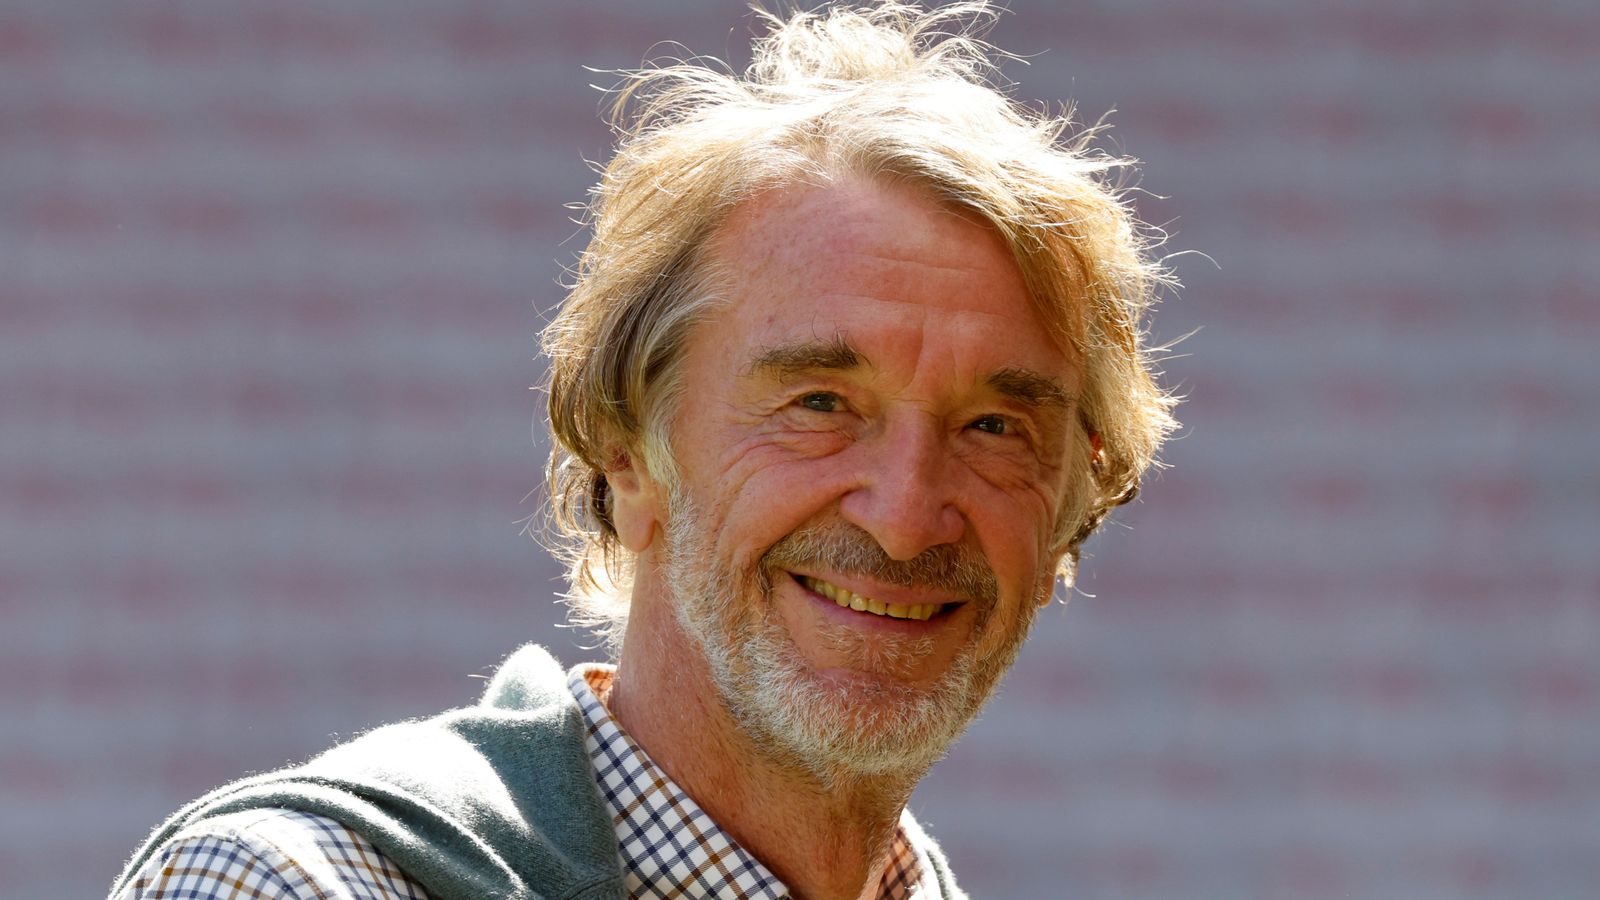 Manchester United fan and billionaire Sir Jim Ratcliffe interested in buying club